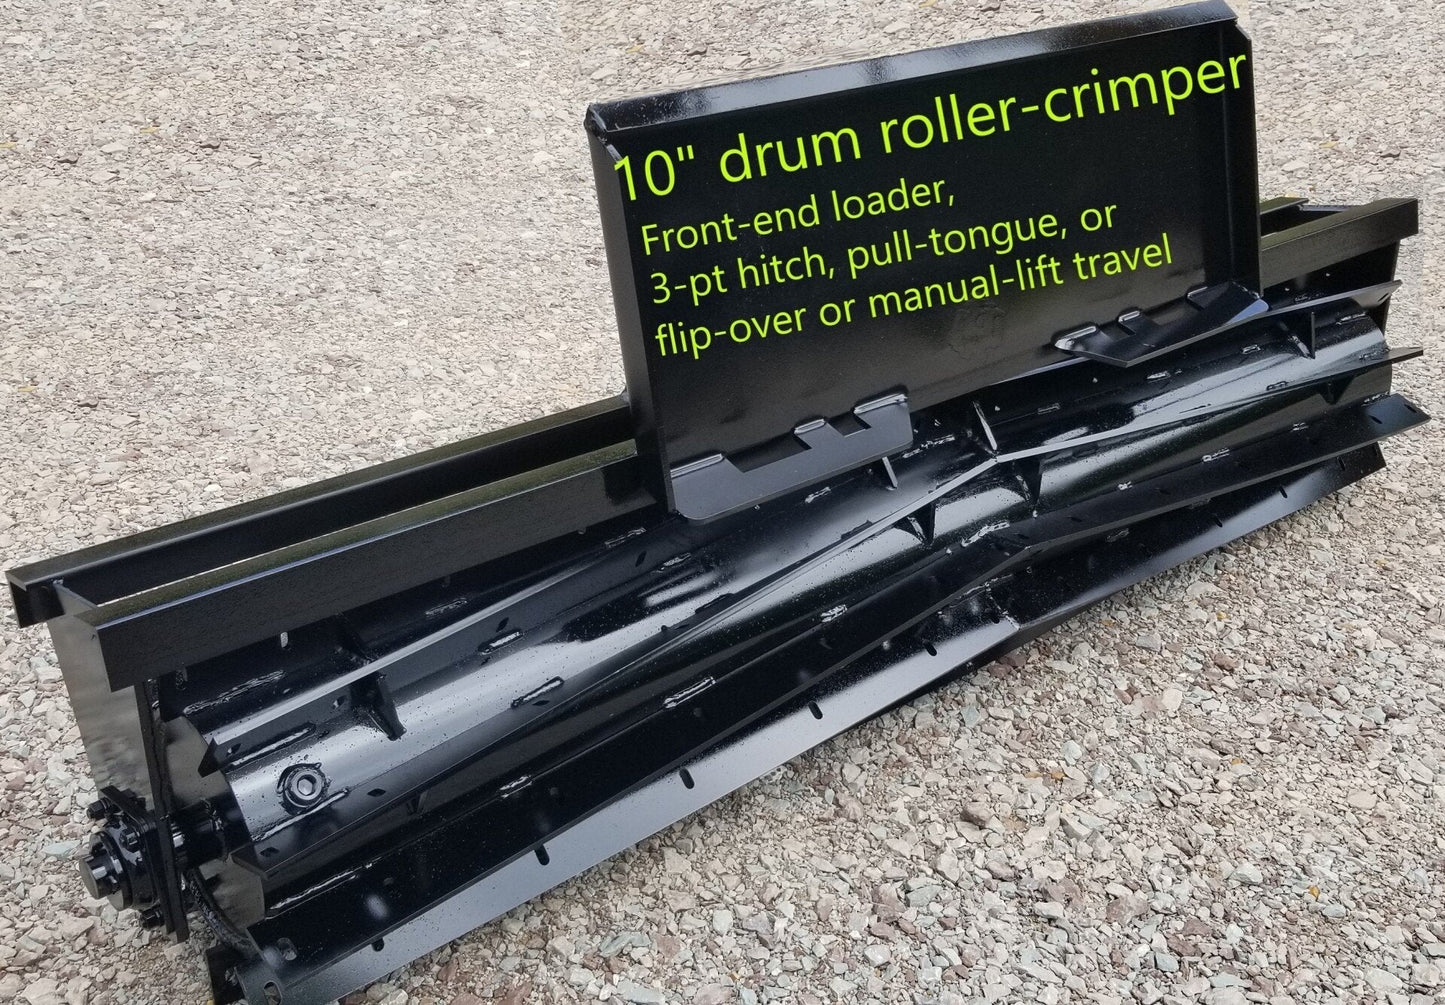 7 Foot Roller Crimper 3 Point - Pull Type Dry/Wet for Food Plots